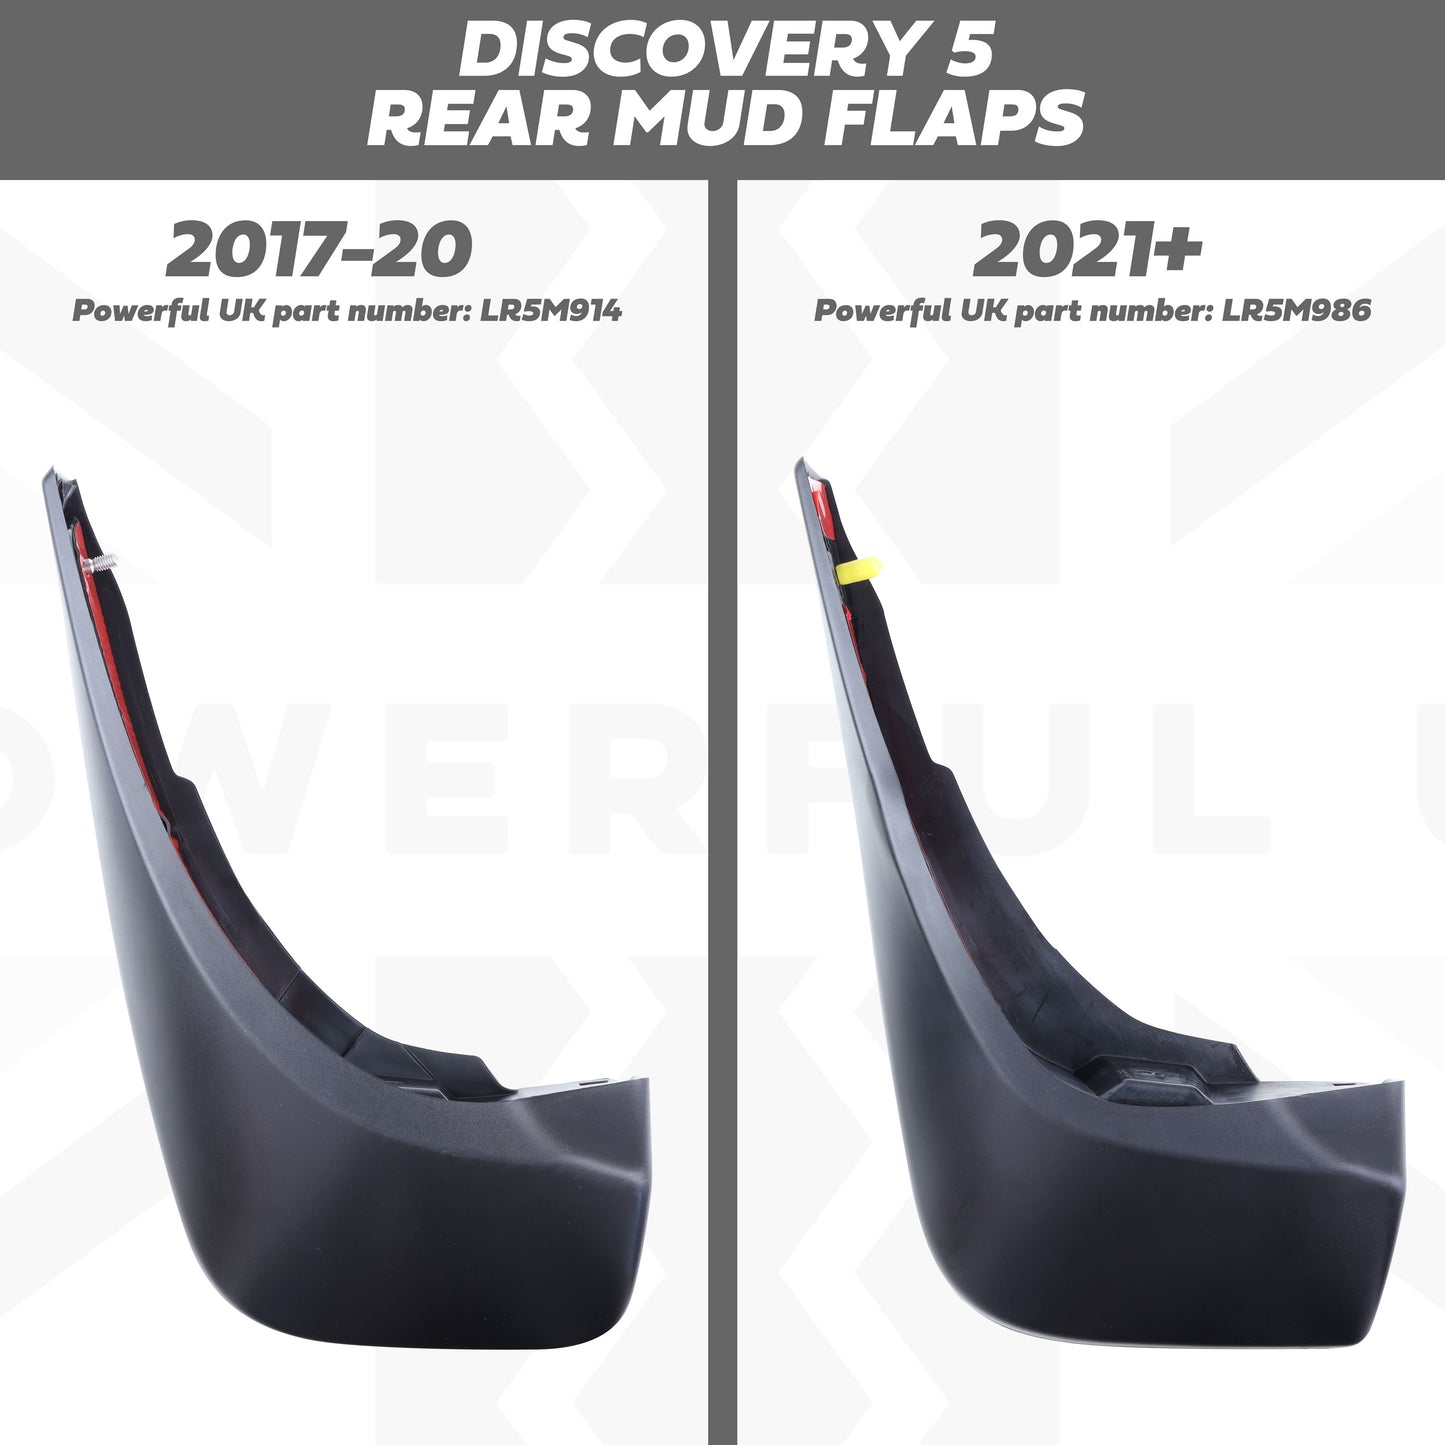 Genuine REAR Mudflaps for Land Rover Discovery 5 facelift 2021+